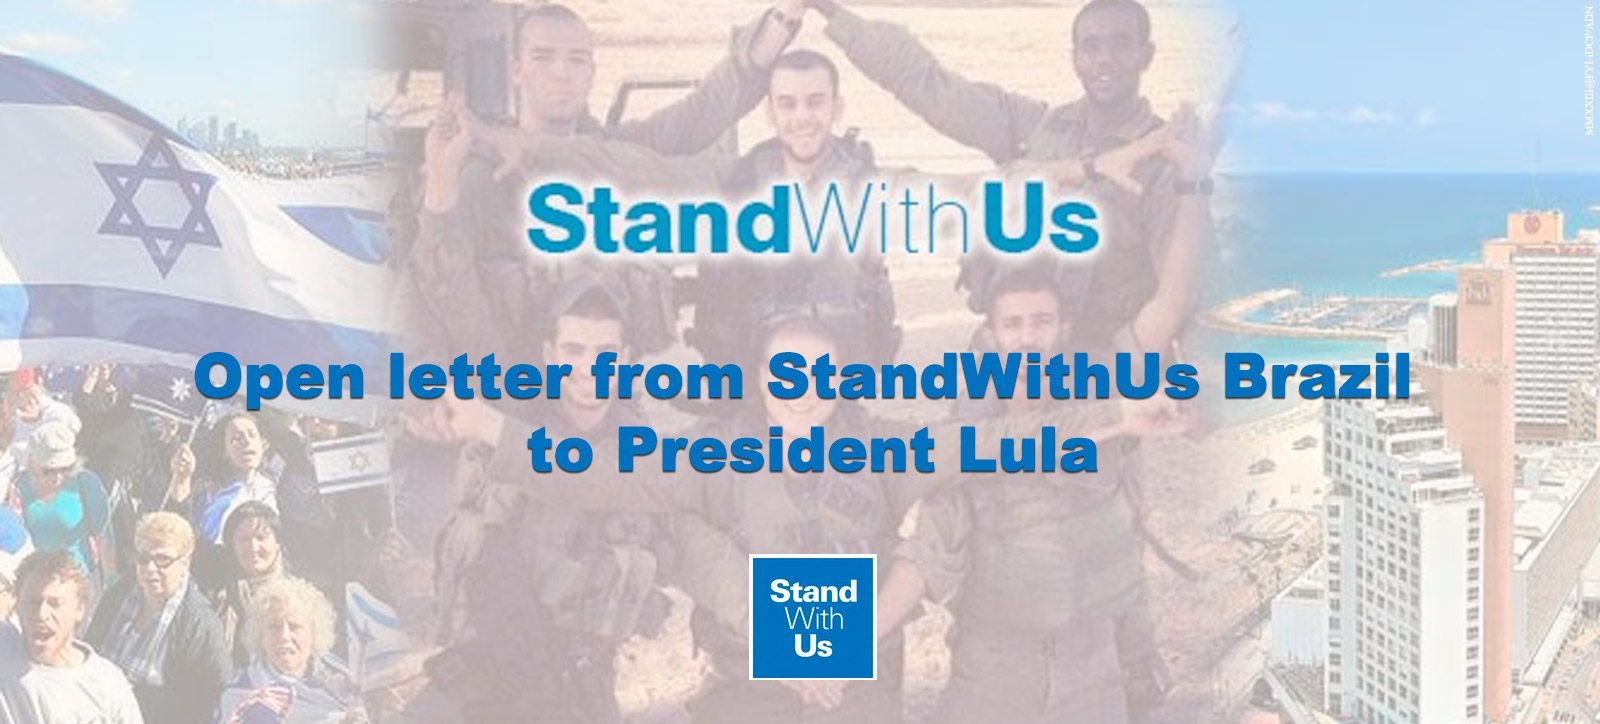 StandWithUs publishes open letter to the president of Brazil